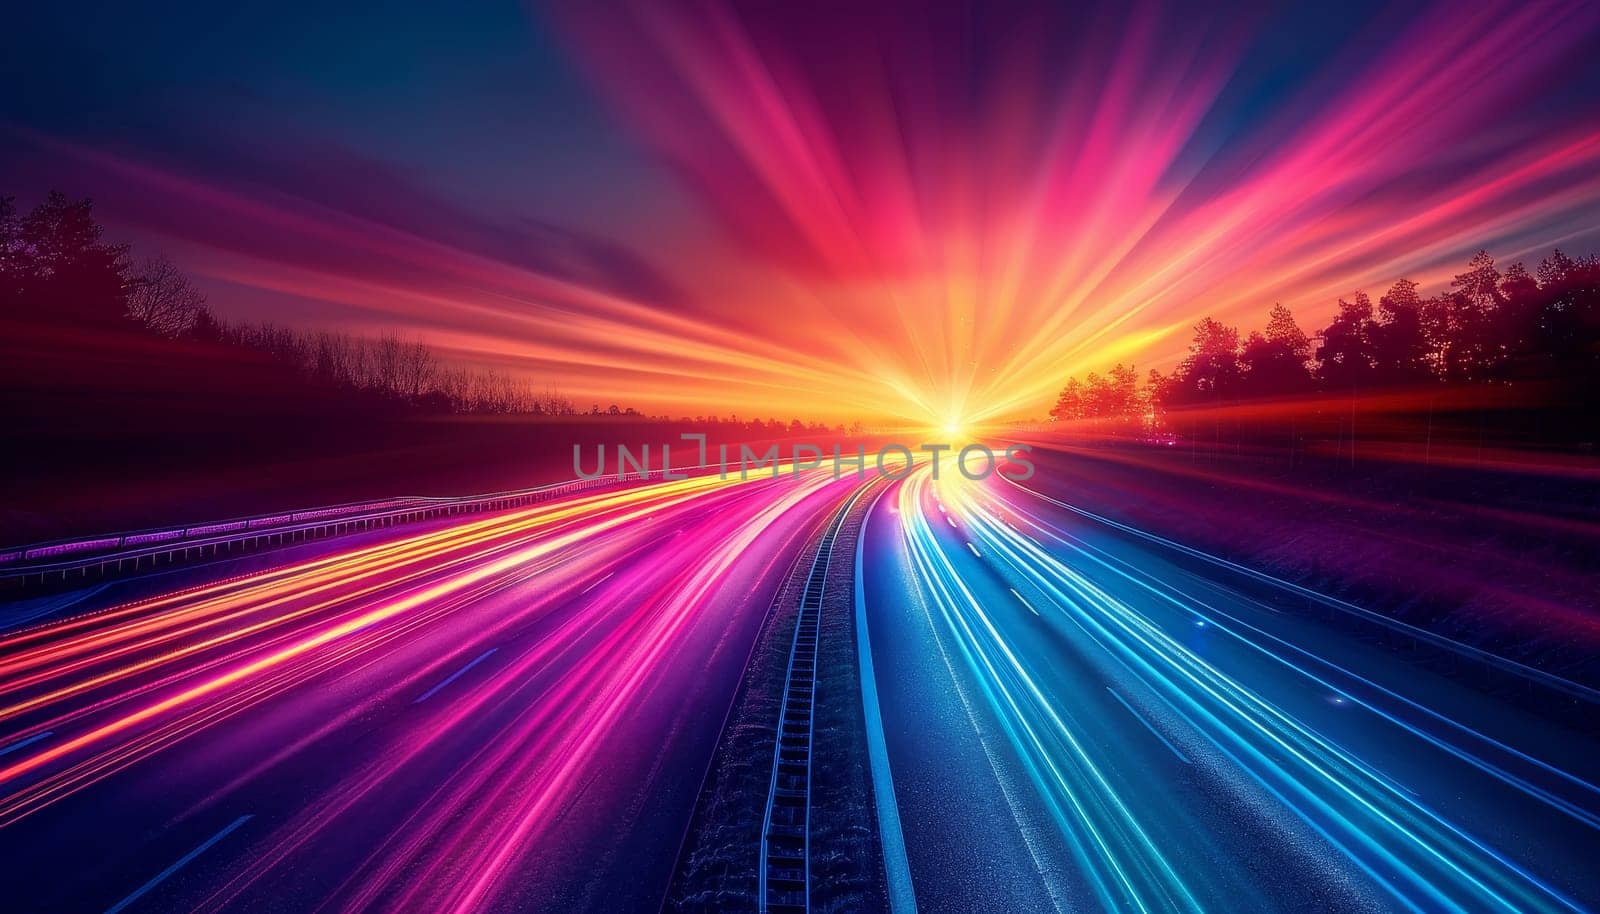 A colorful road with a bright sun in the sky by AI generated image.